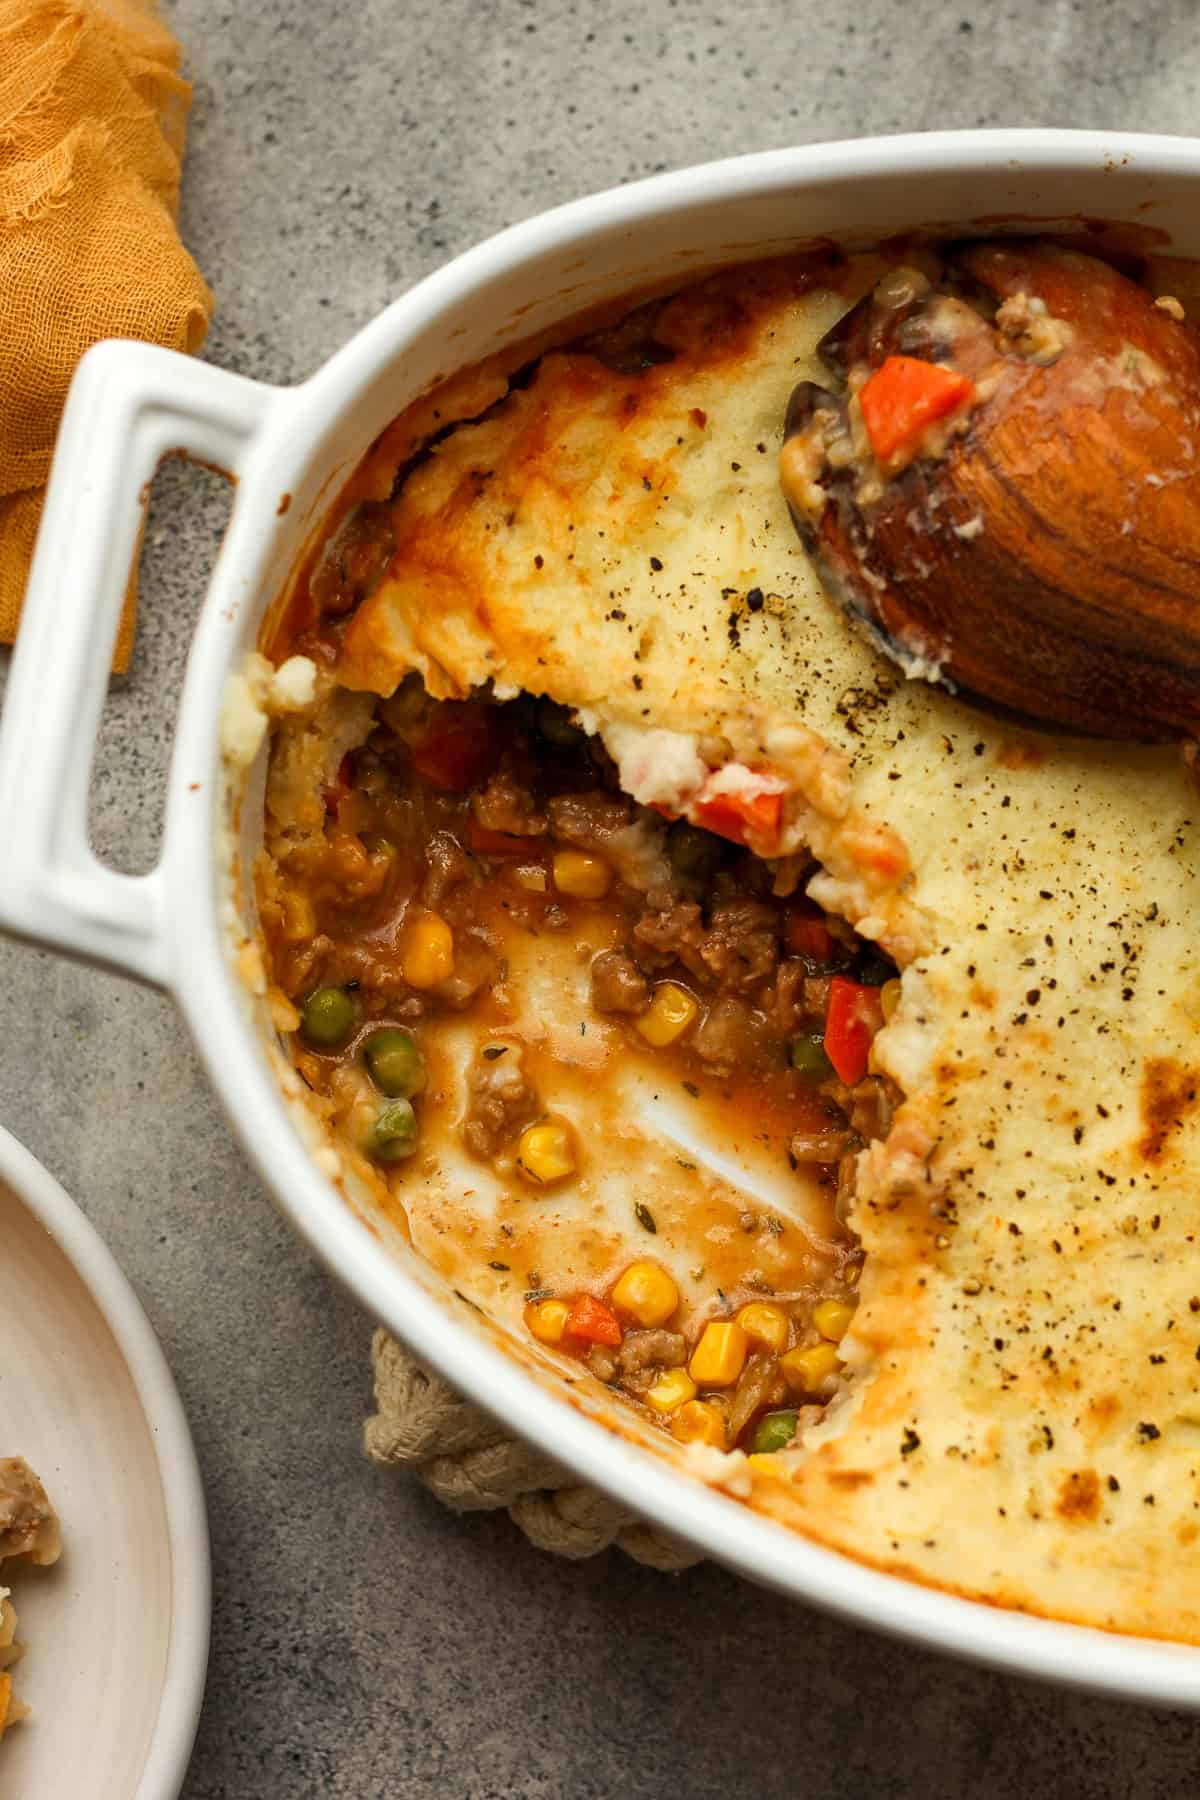 A closeup on the shepherds pie with a serving removed.